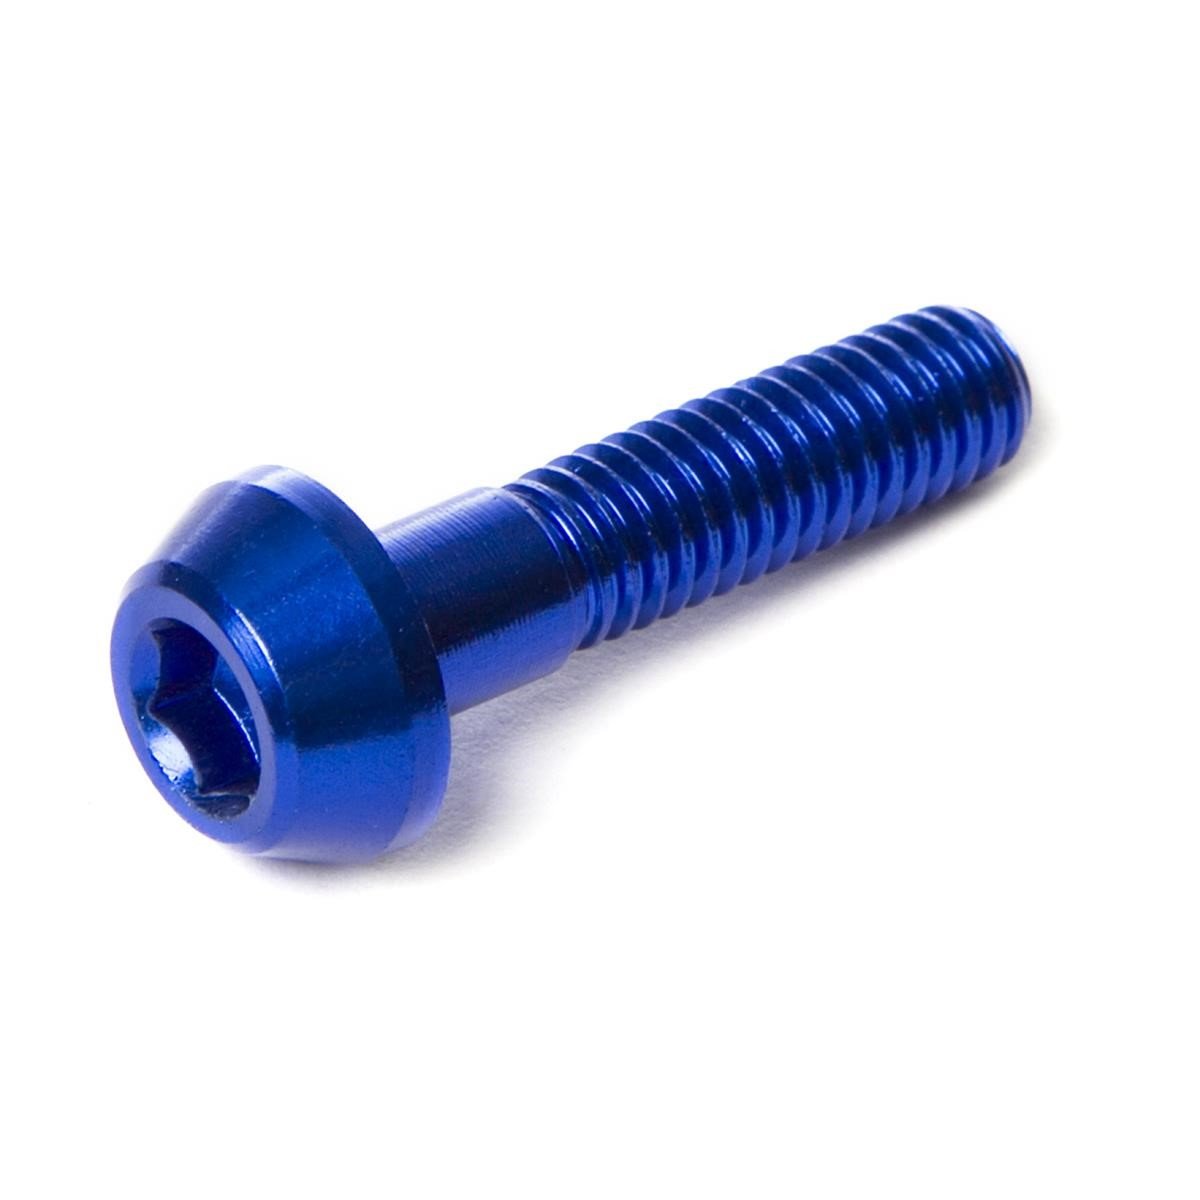 DRC Inner Hex Bolts  M6 x 30 mm, Blue, Pack of 20